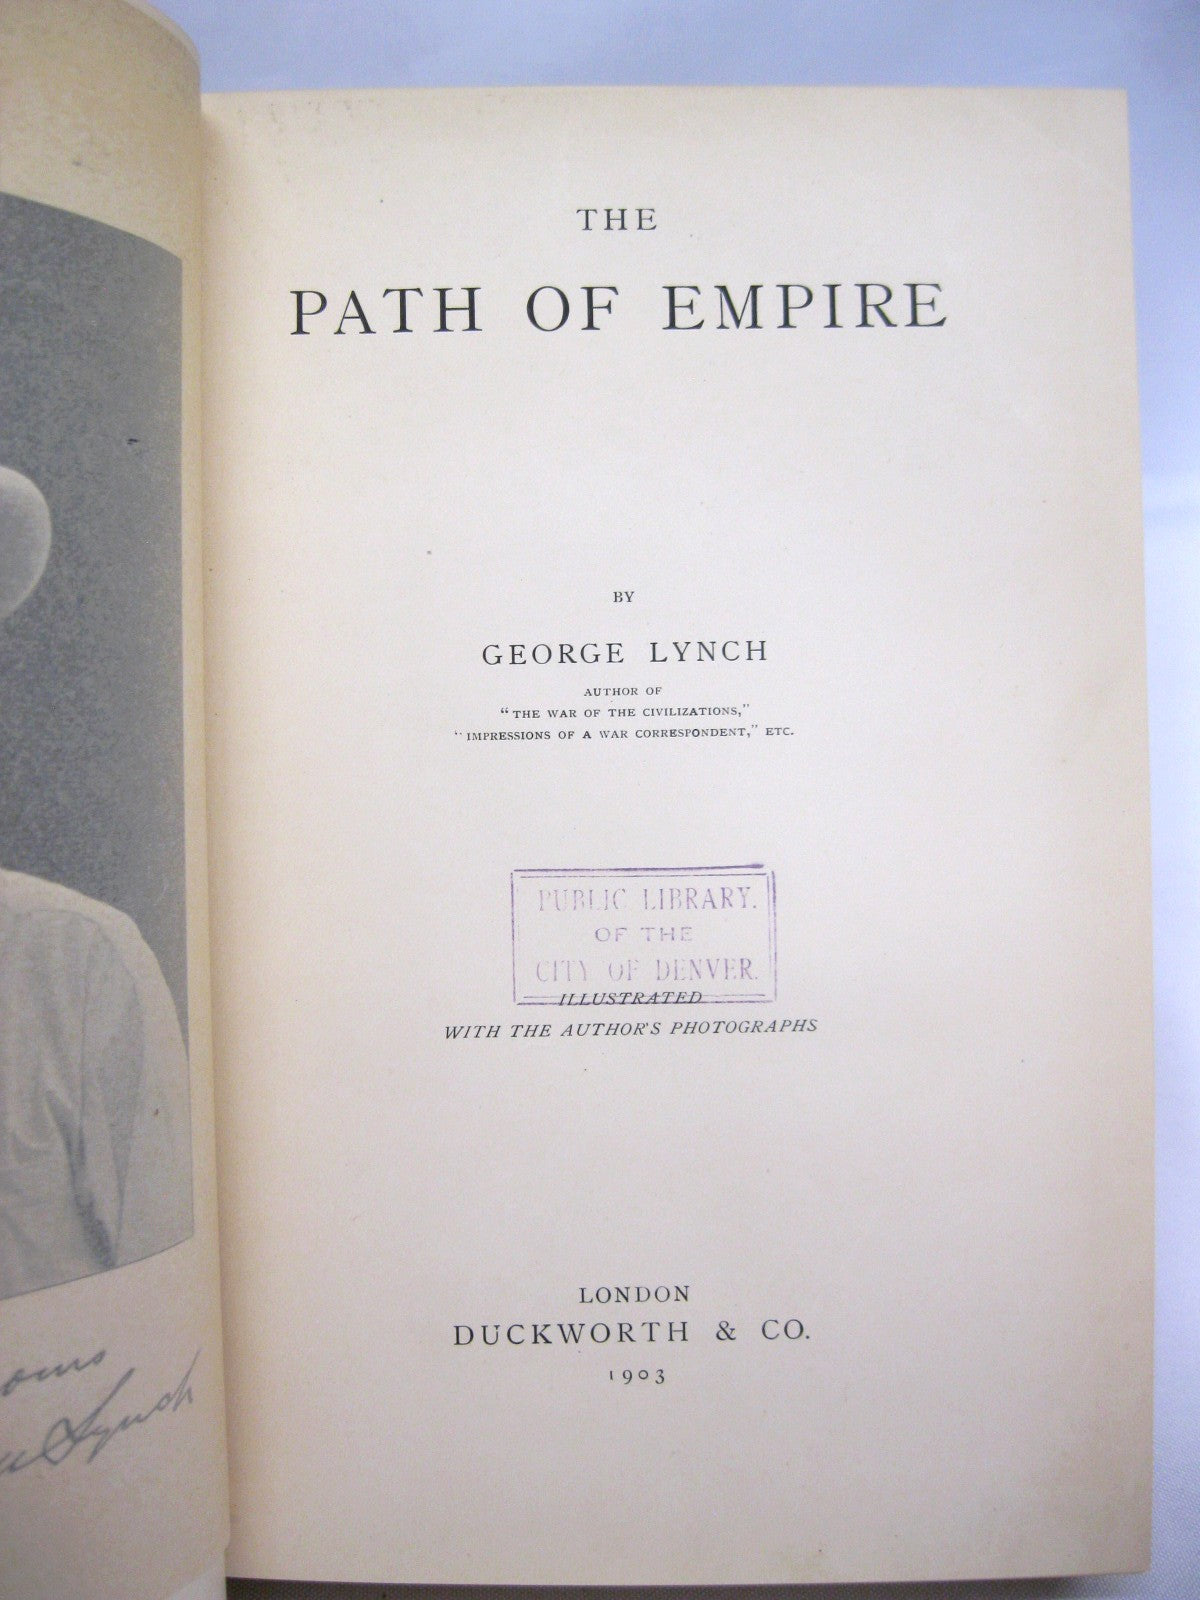 The Path of Empire by George Lynch